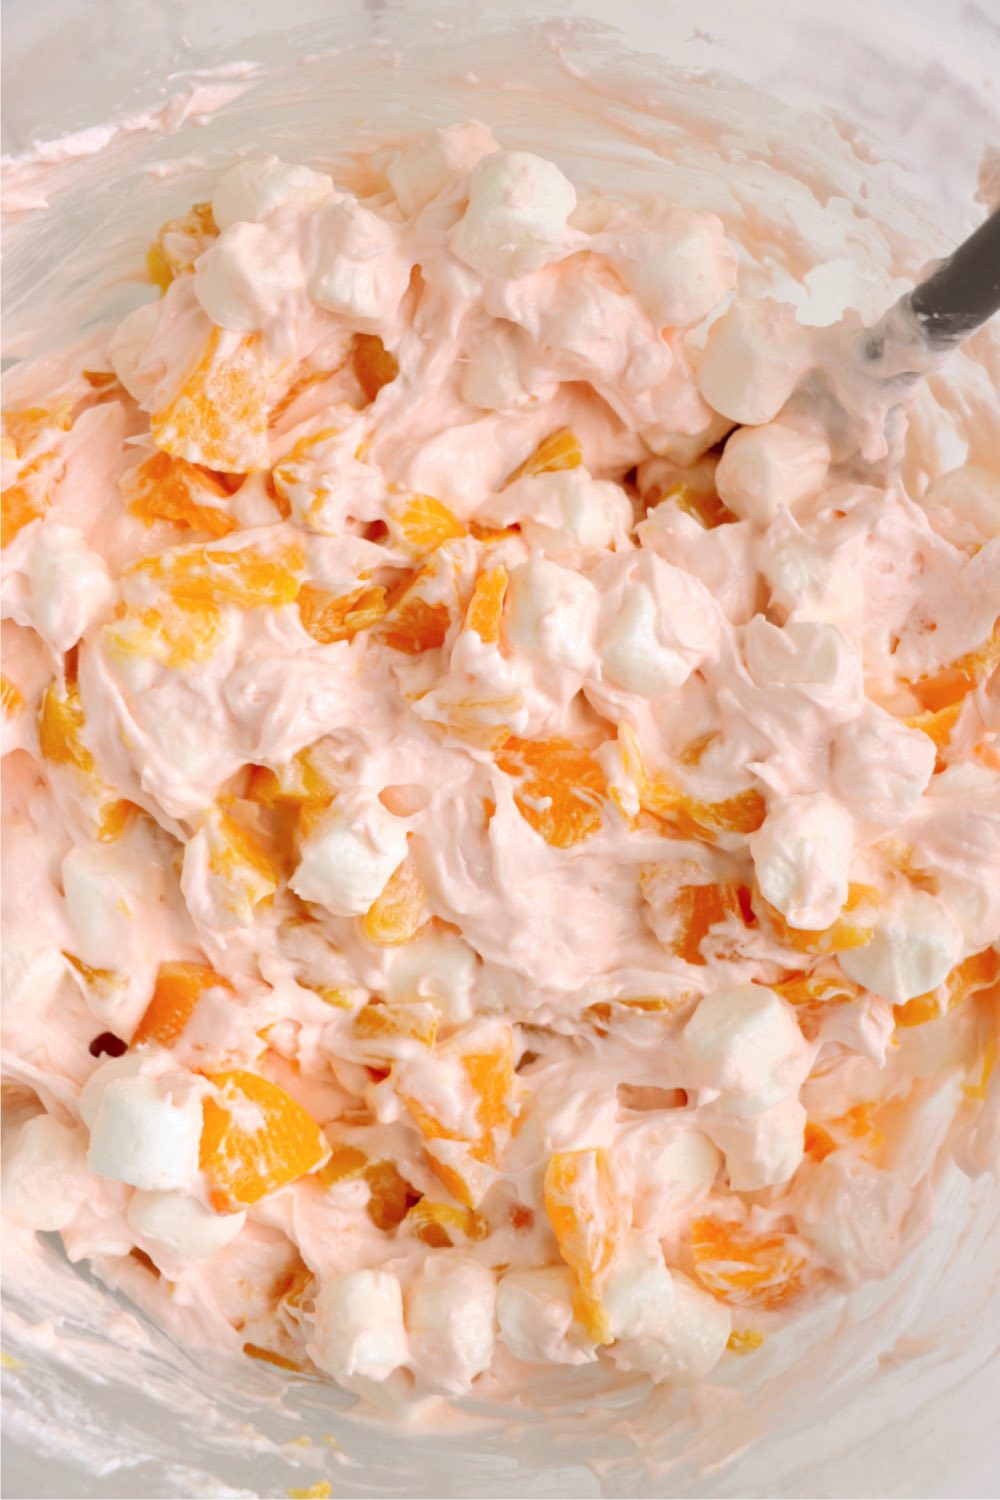 Mixing mini marshmallows and peaches into a creamy fluff salad.